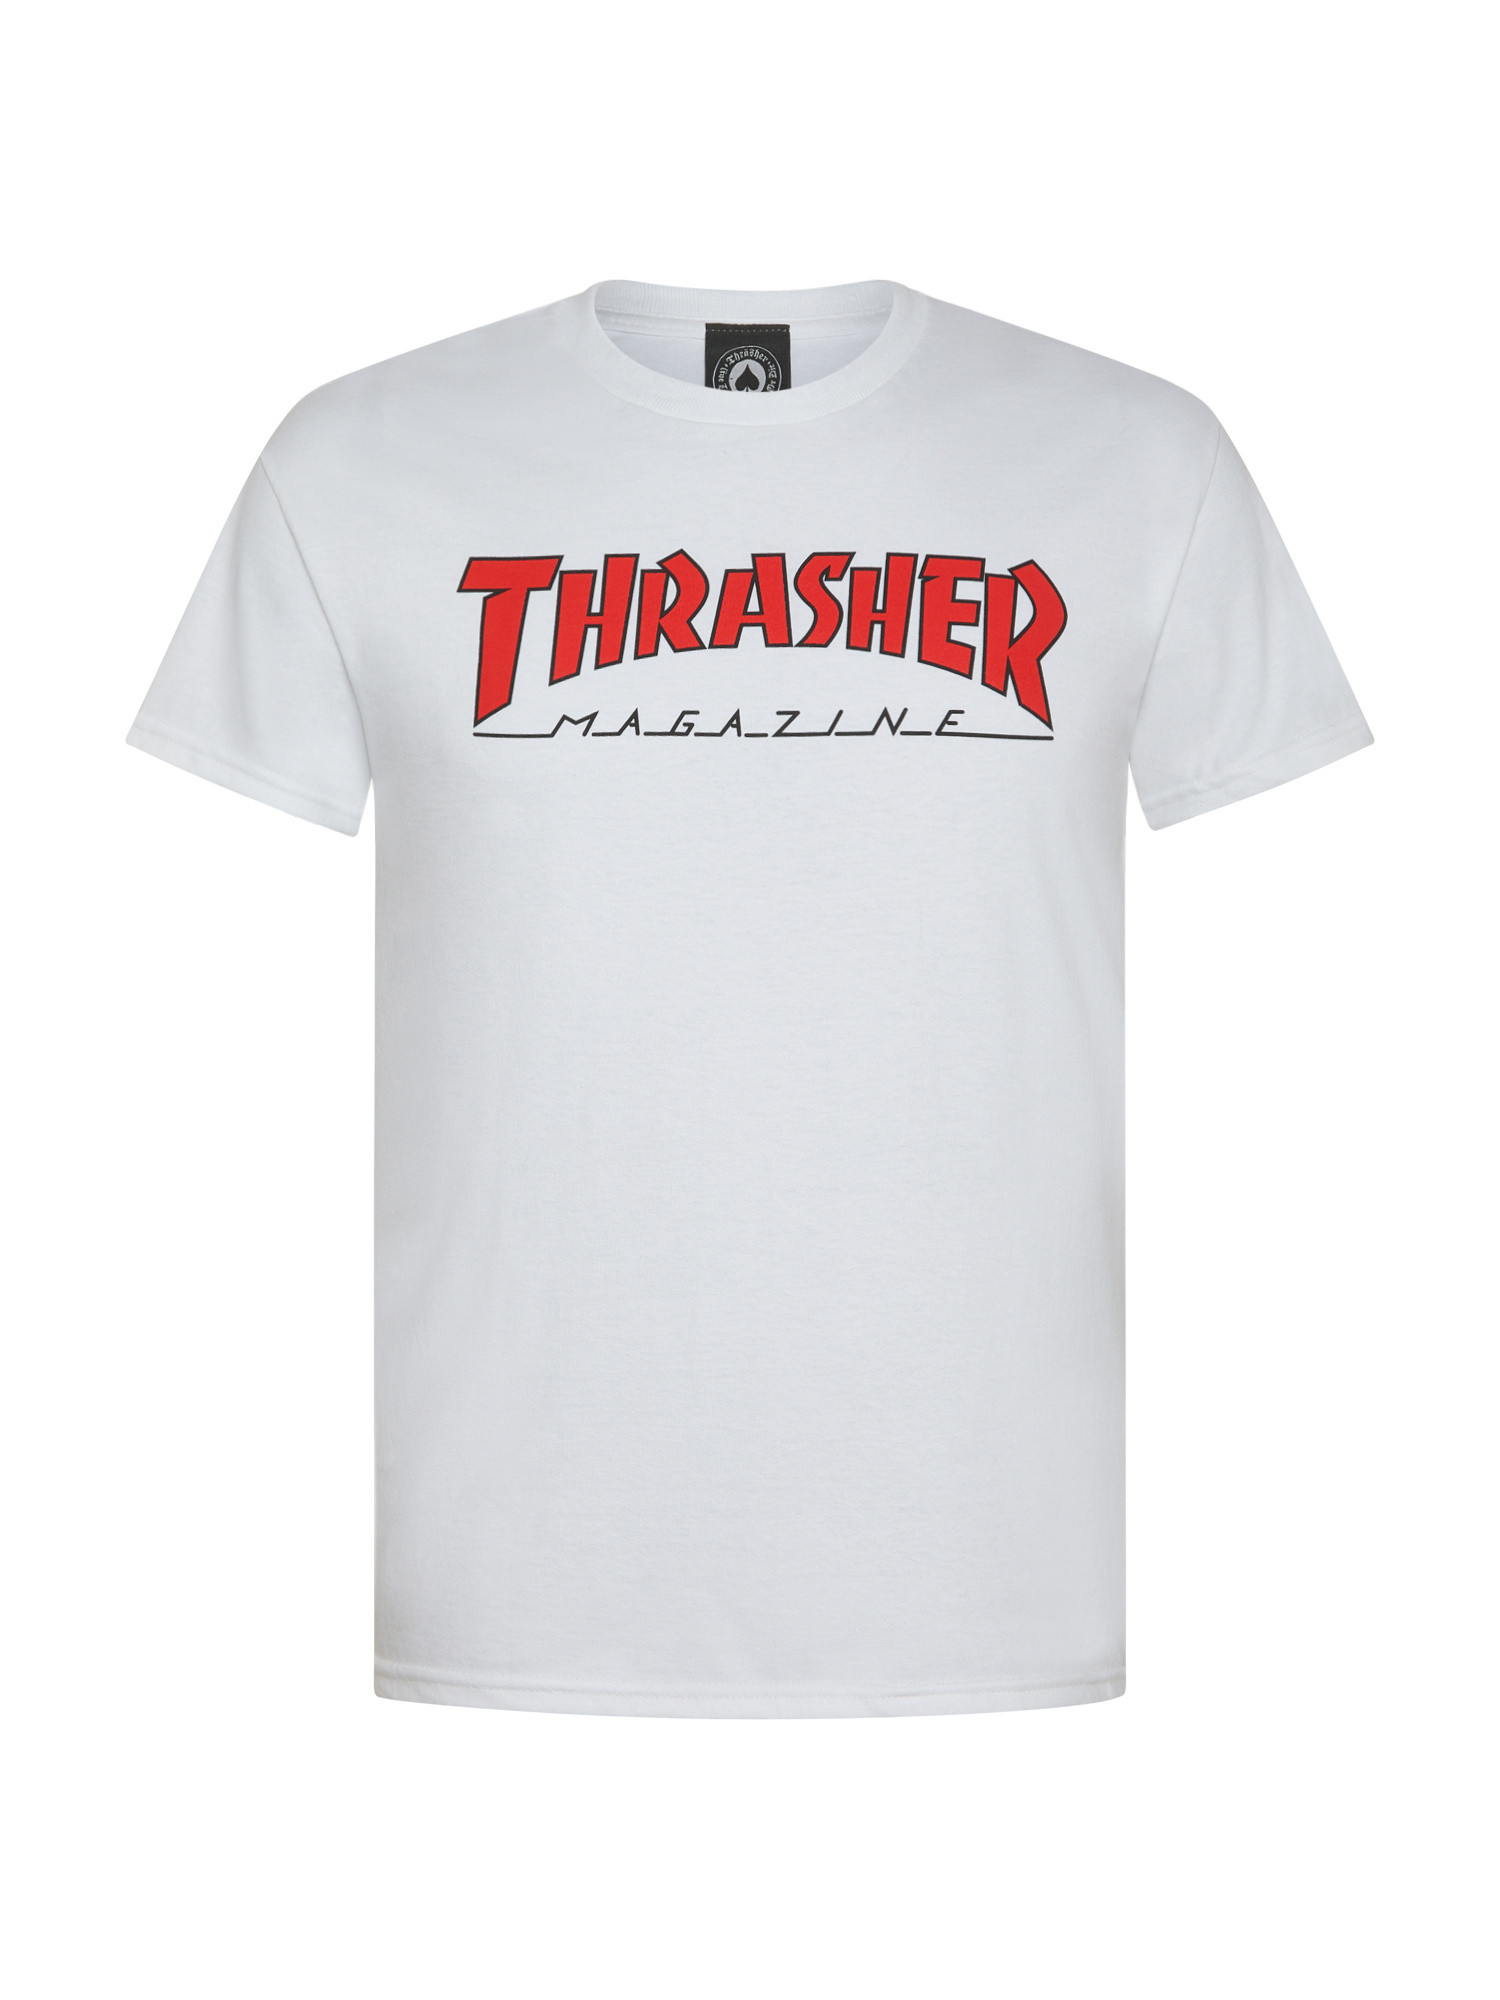 Thrasher - T-Shirt with outlined logo, White, large image number 0